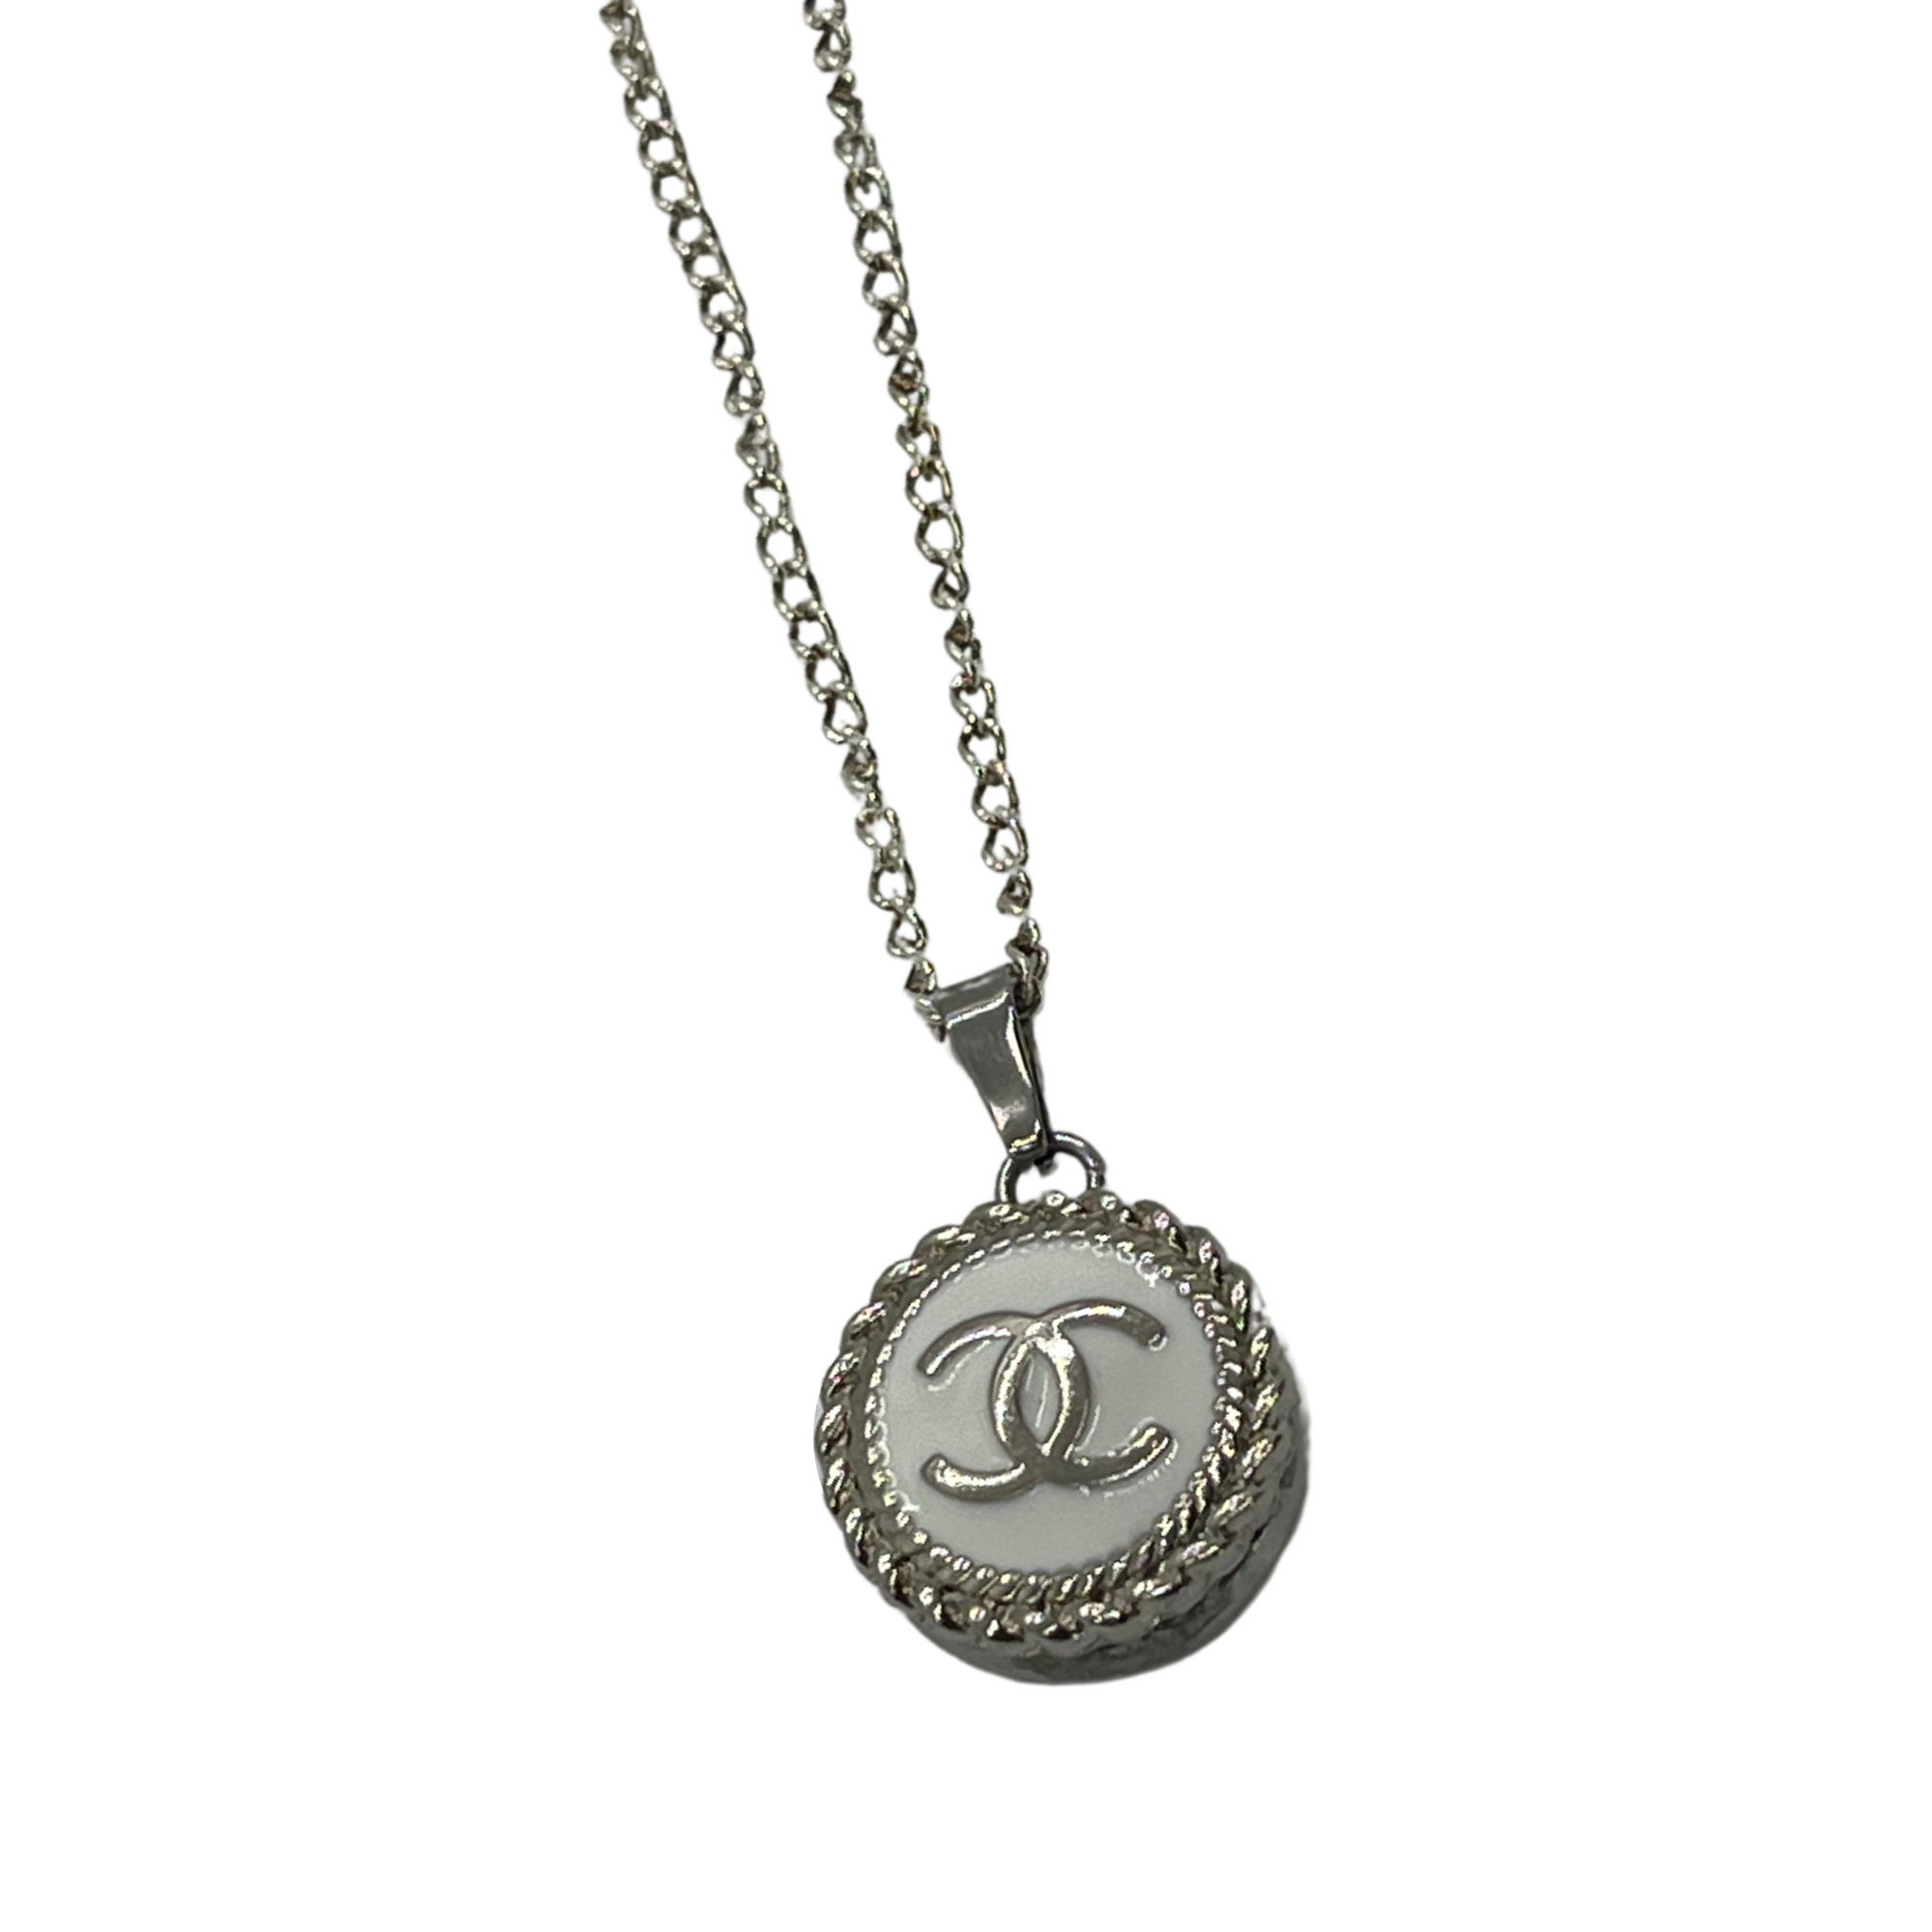 Cc necklace Chanel Silver in Metal  7488379